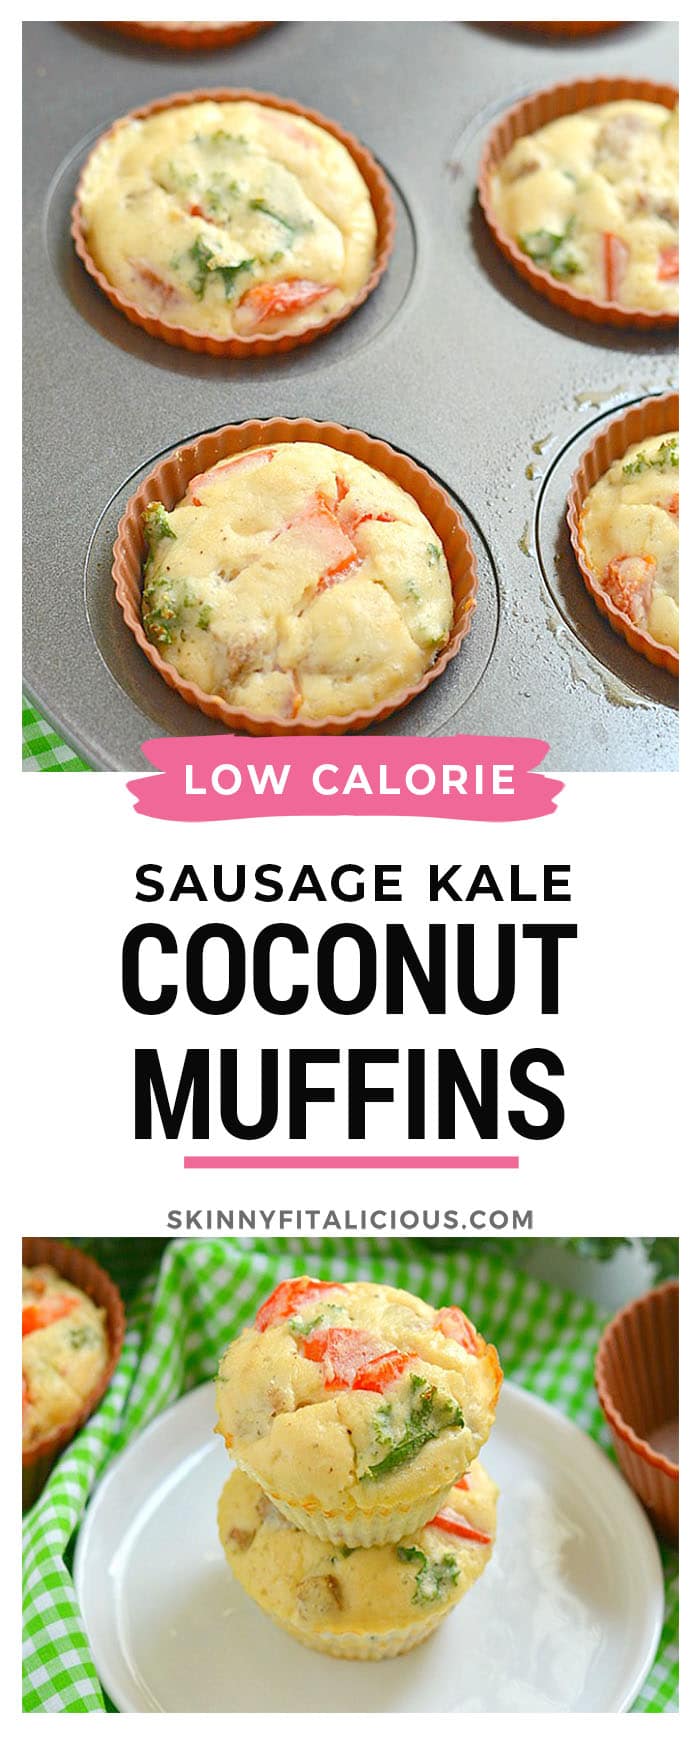 Paleo Sausage Kale Coconut Egg Muffins made with coconut flour for a rich, creamy texture. High protein, low carb breakfast muffins that are hearty, filling & taste like mini pizzas! Gluten Free + Low Calorie + Paleo